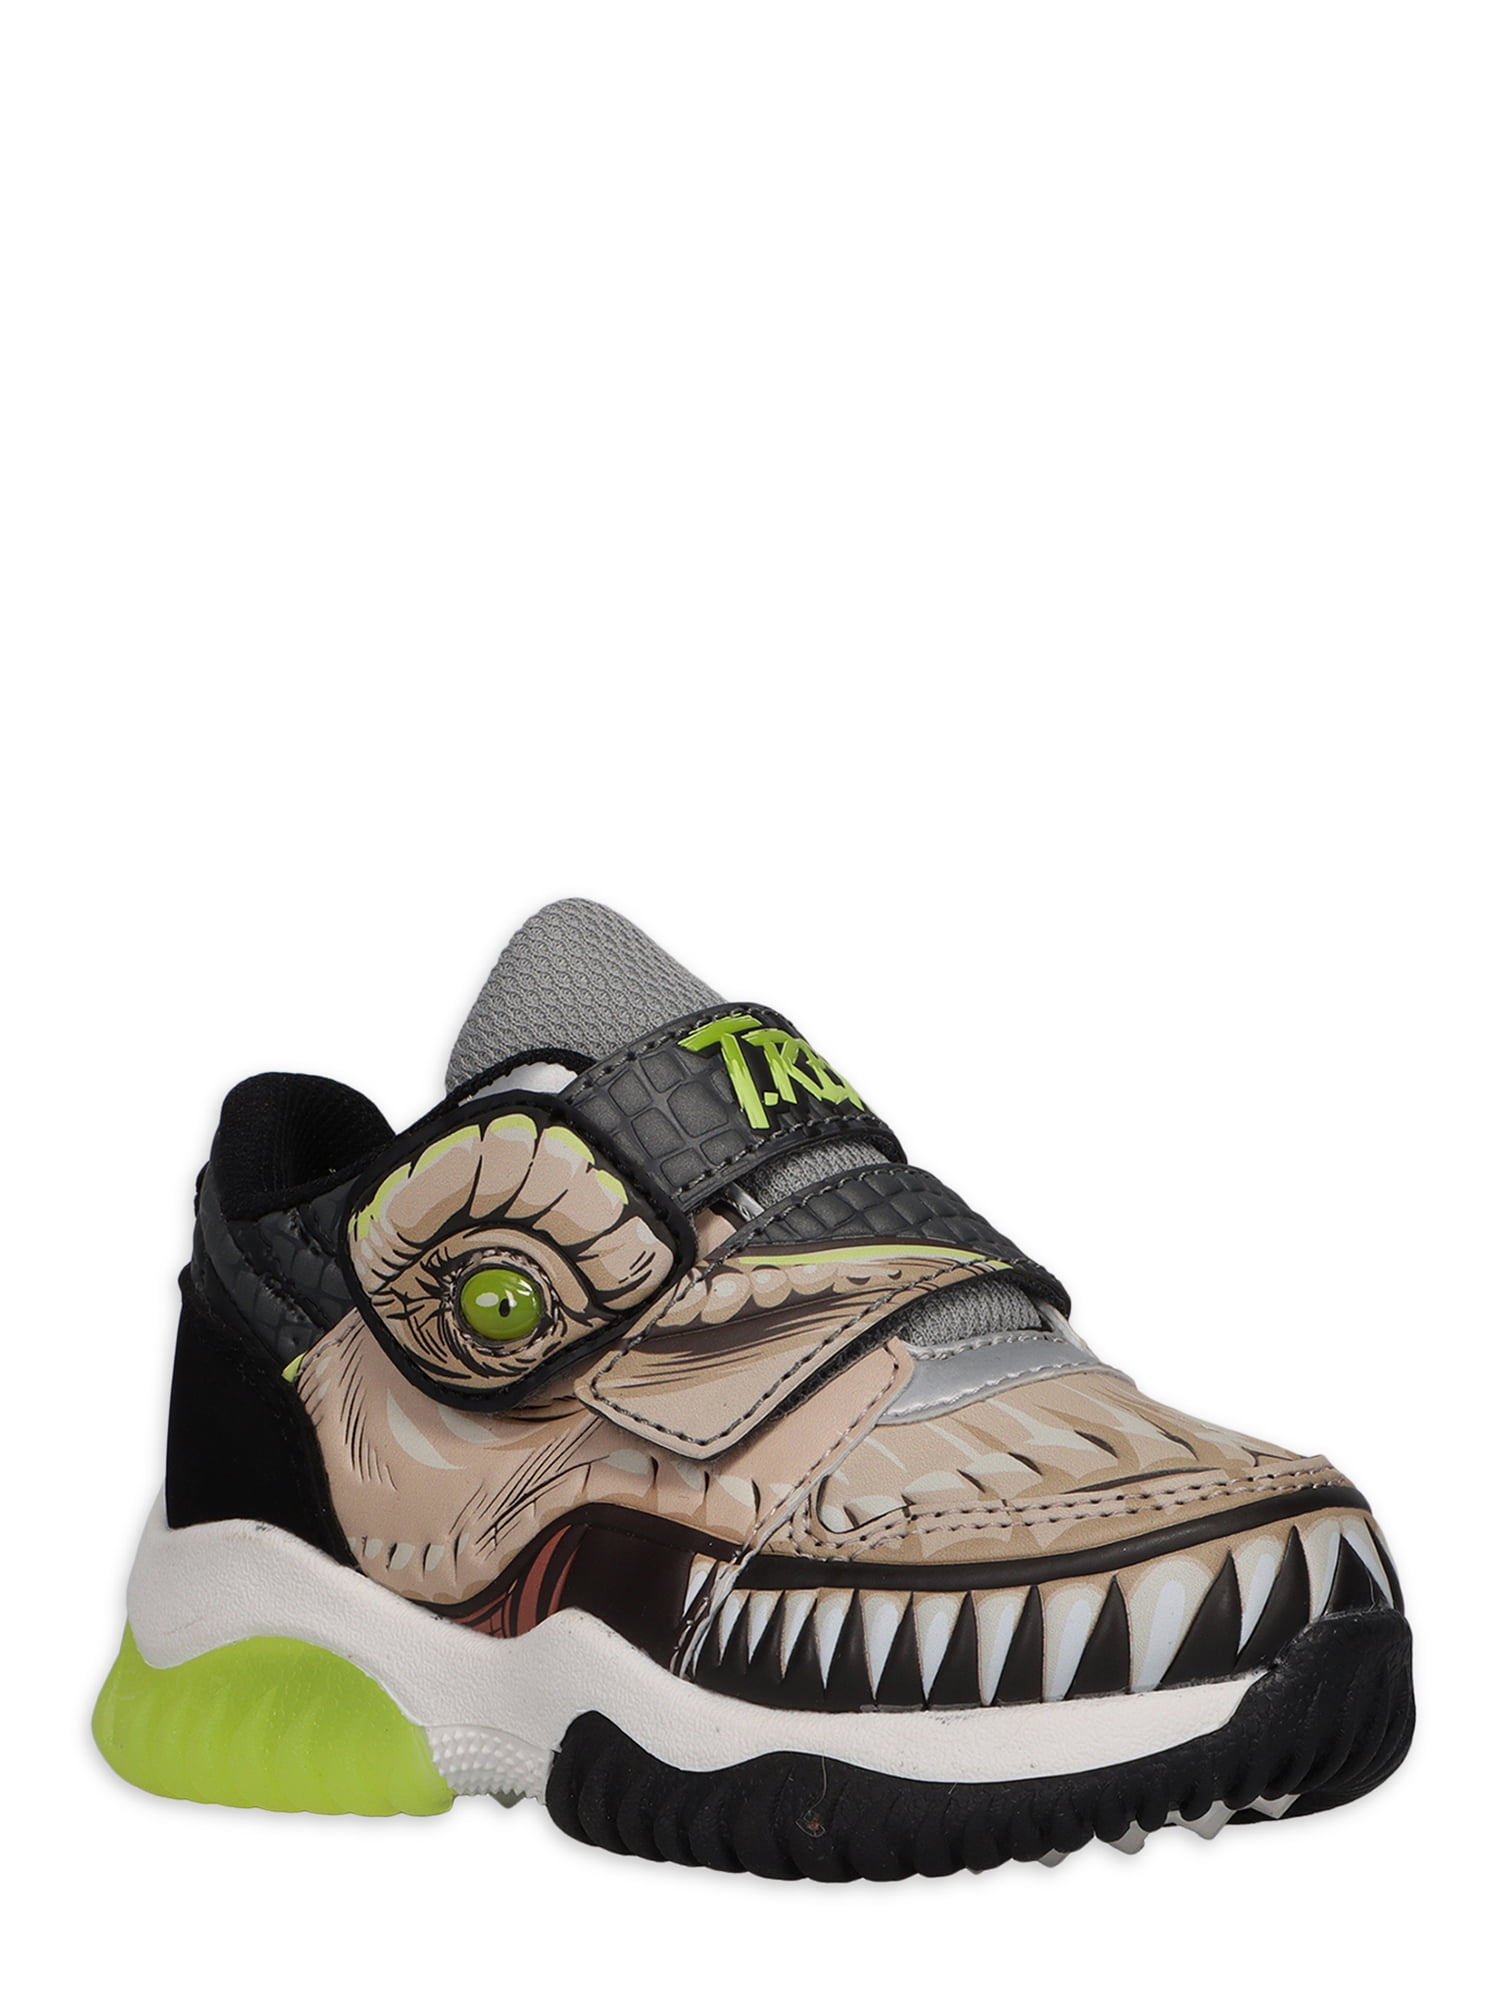 Jurassic World Sneakers Shoes Size 6 7 8 9 10 11 12 Light Up Toddler New Boys 